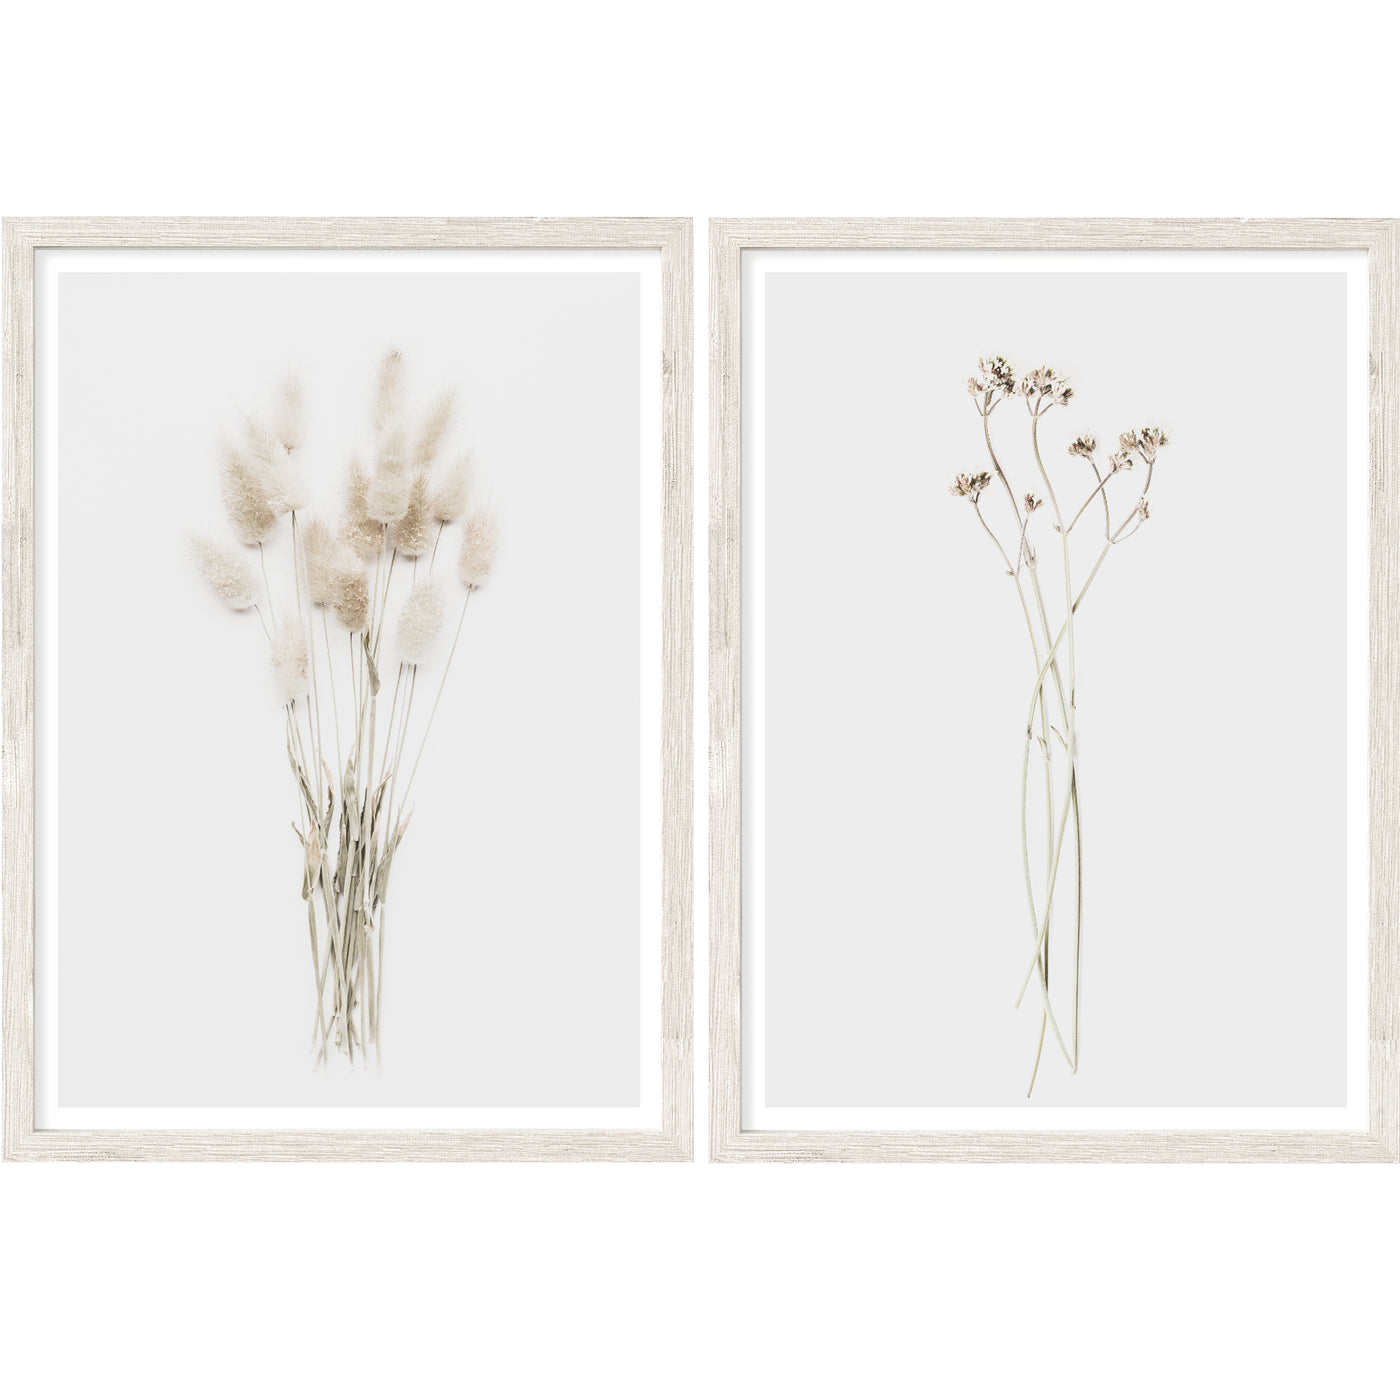 Wildflowers and Bunnytail Grass - Set of 2